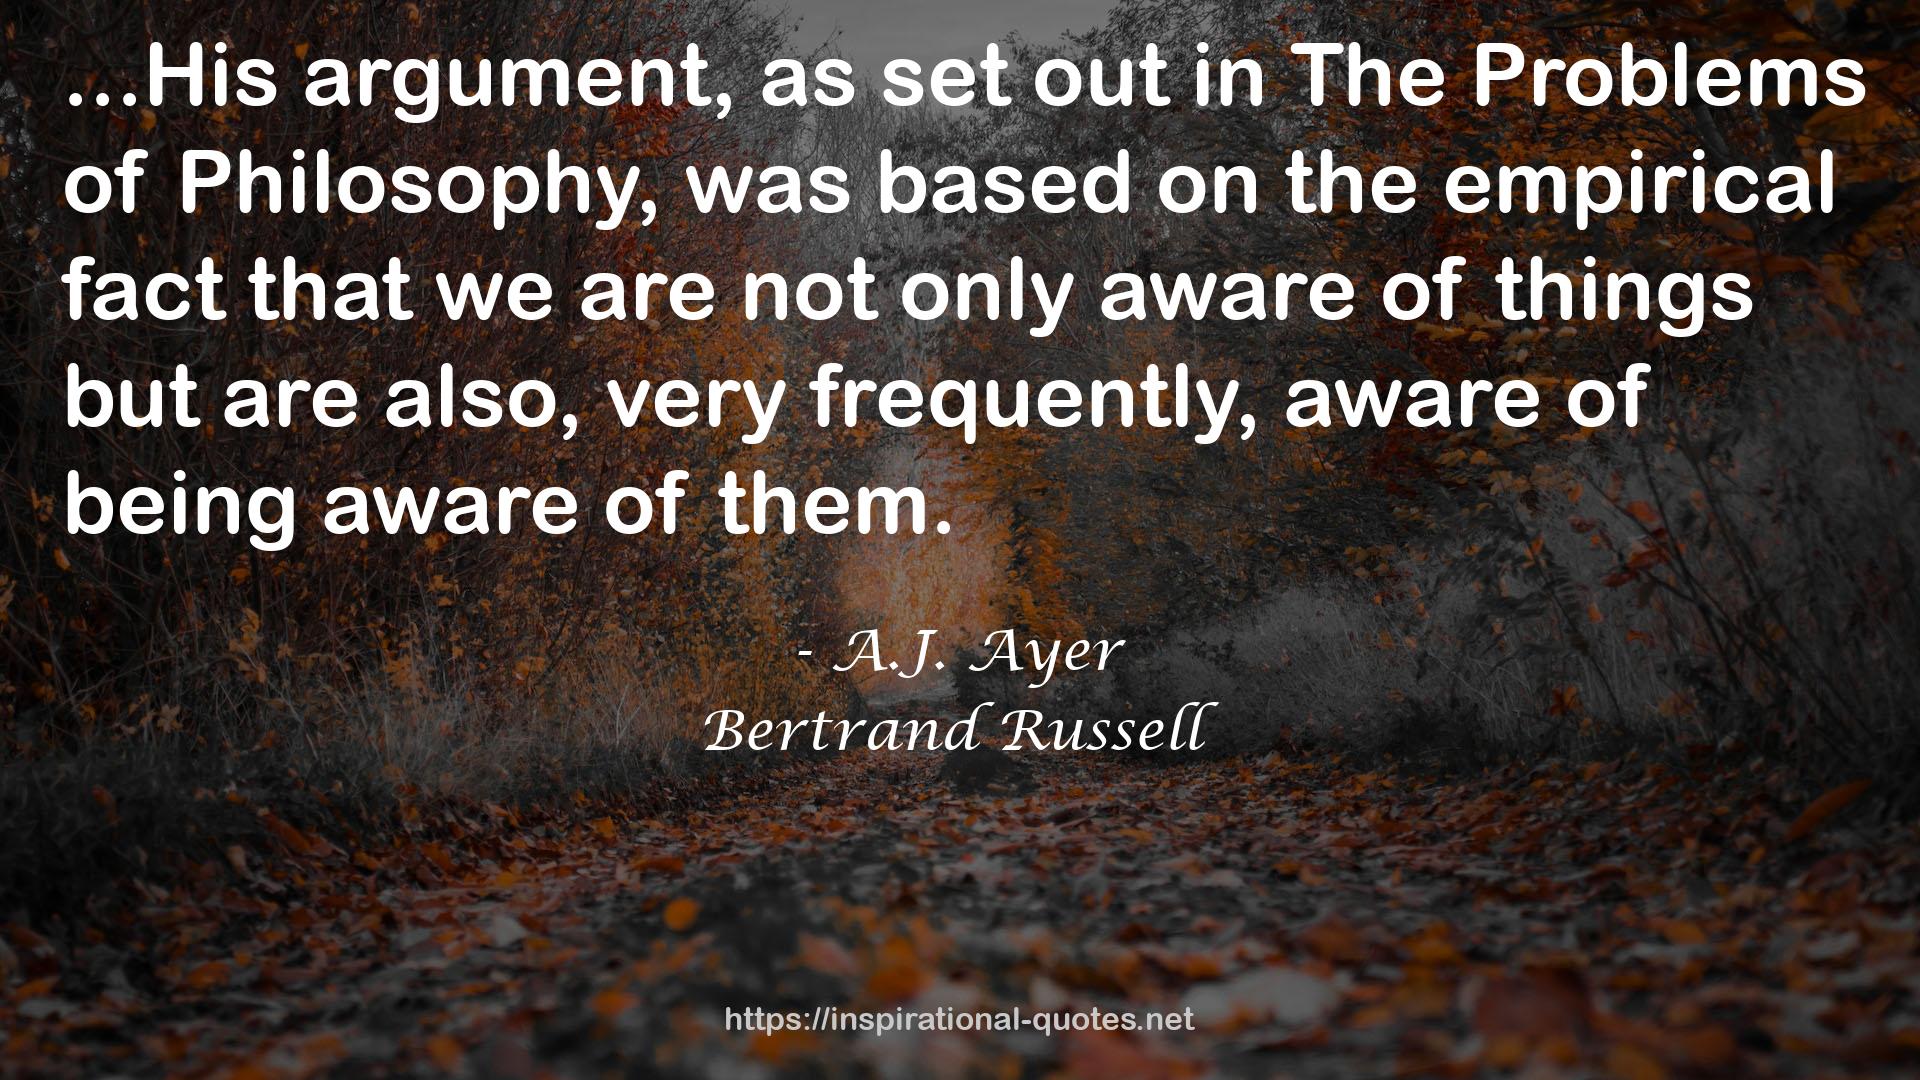 Bertrand Russell QUOTES